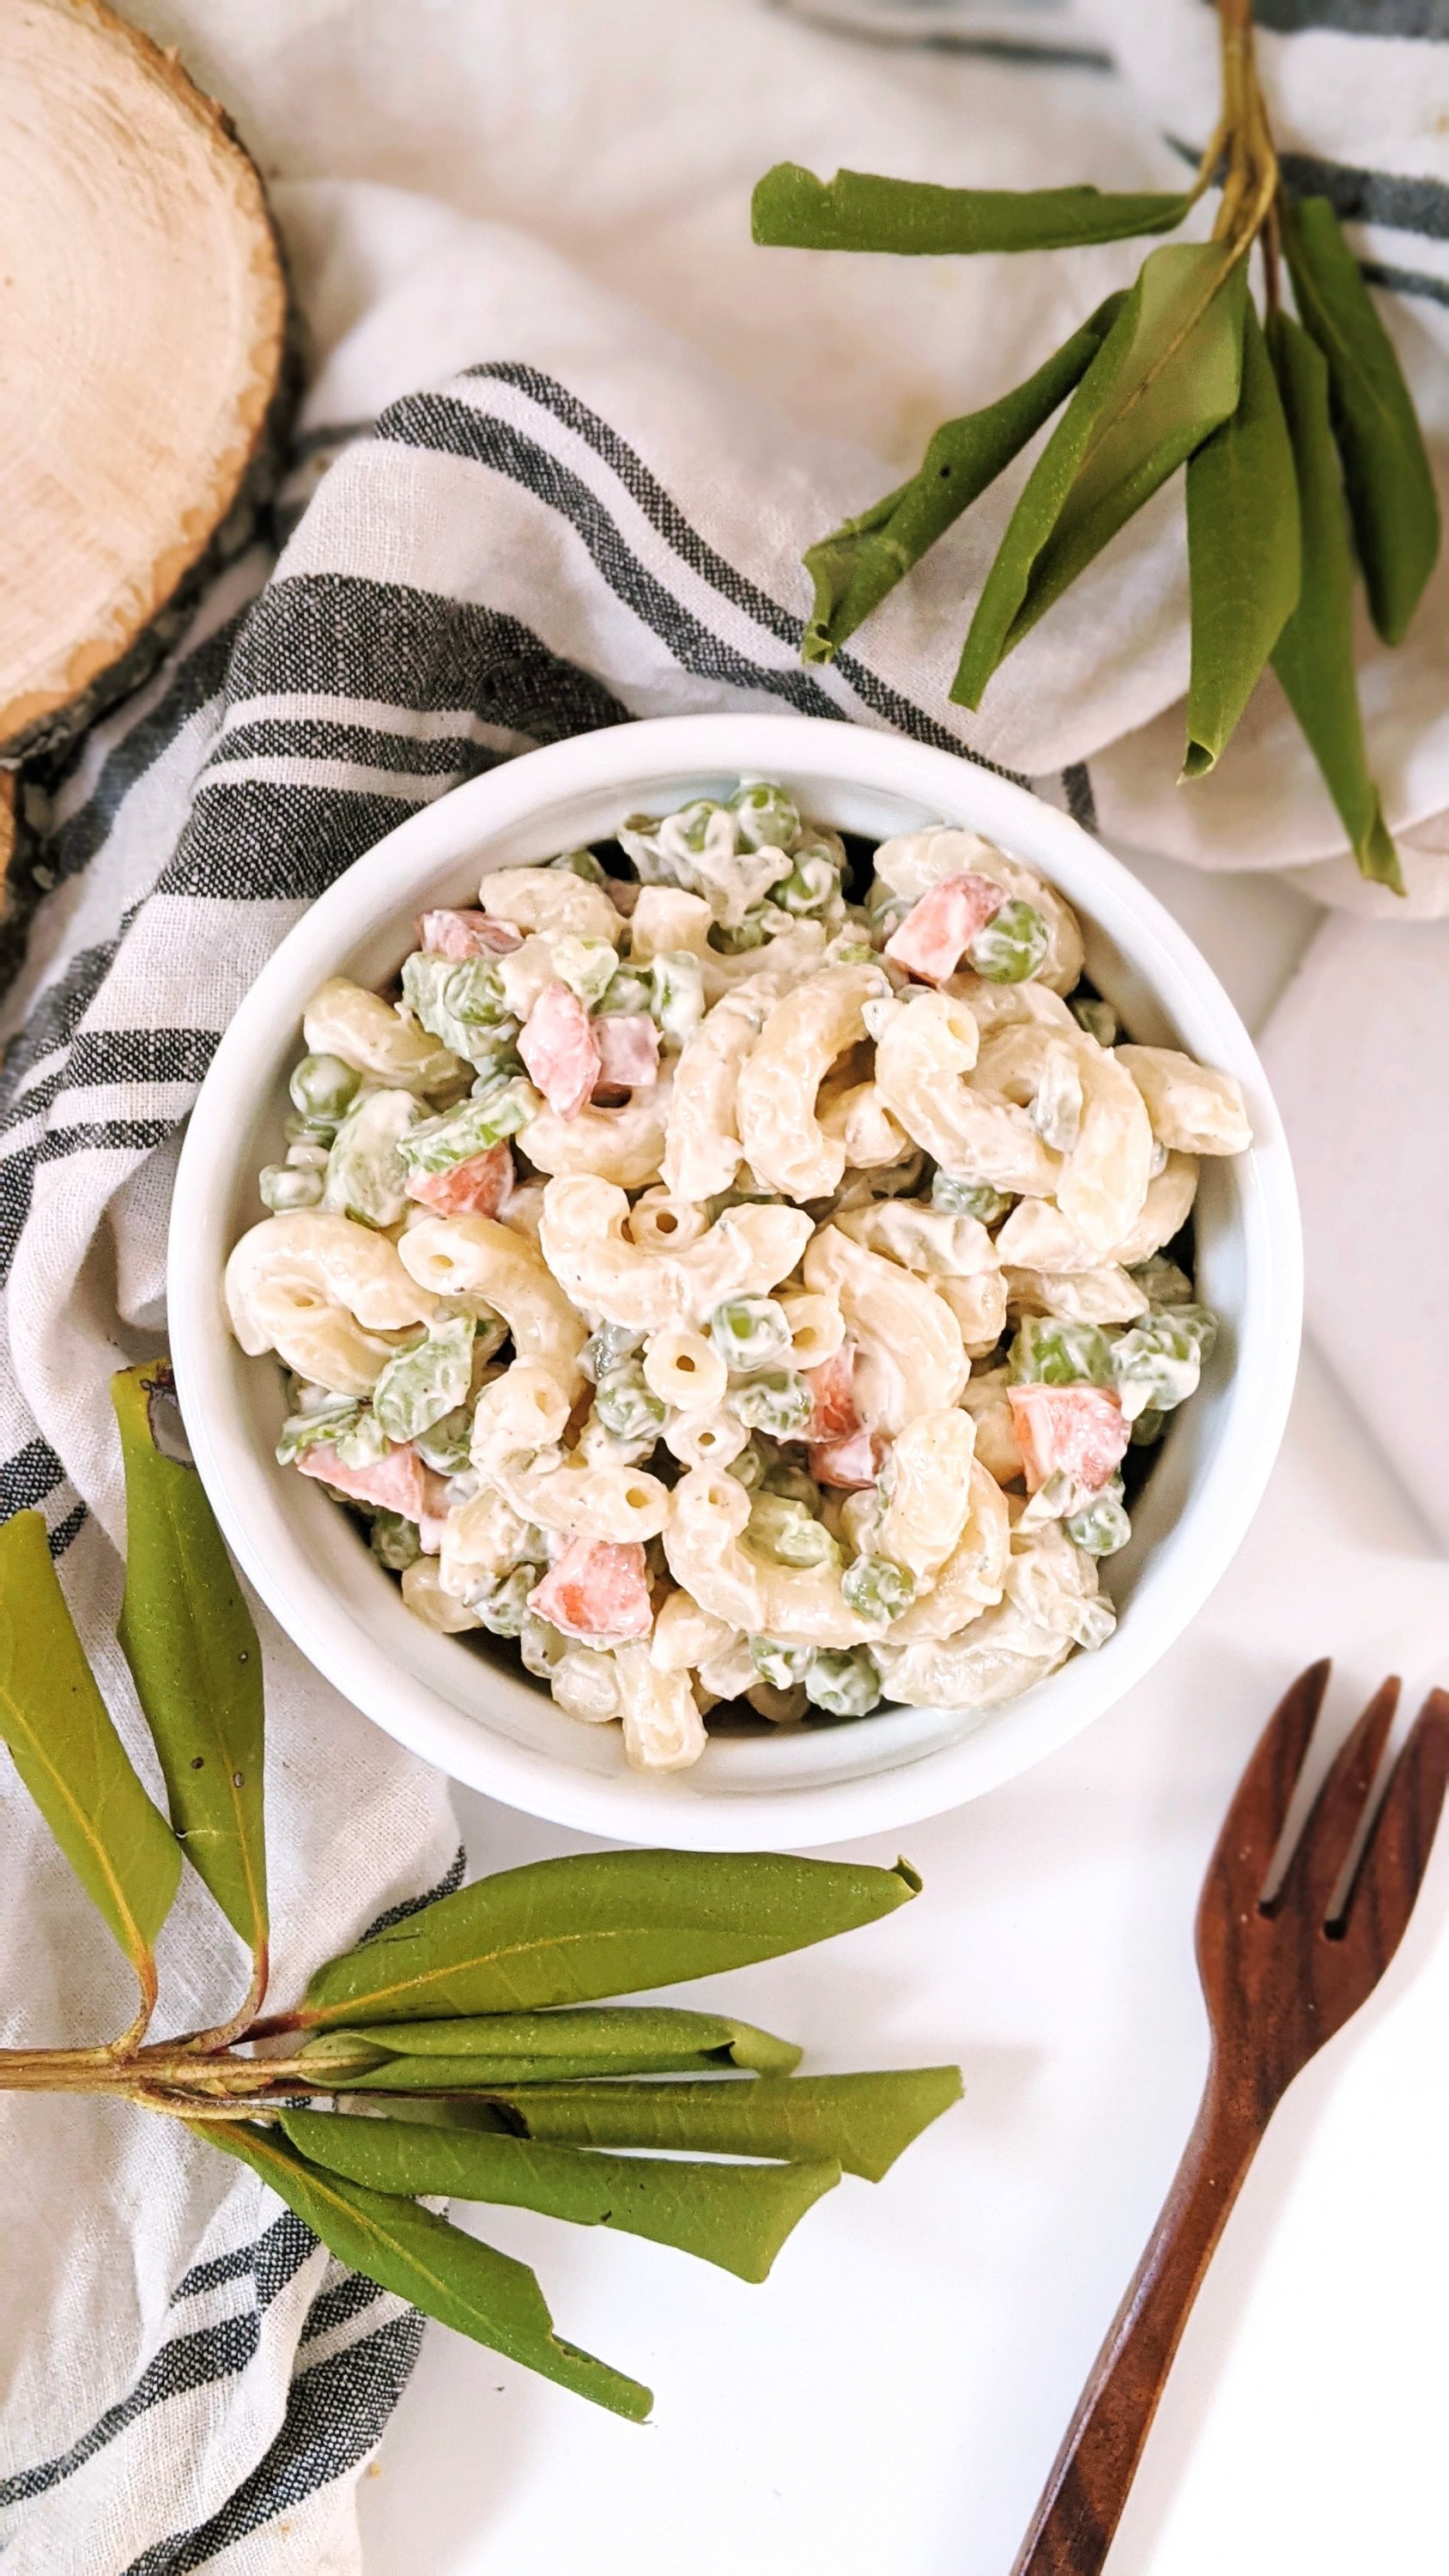 mac and pea salad recipe dairy free vegan ranch dressing pasta salad recipe gluten free pasta salads for entertaining summer side dish recipes macaroni salad with peas and ranch